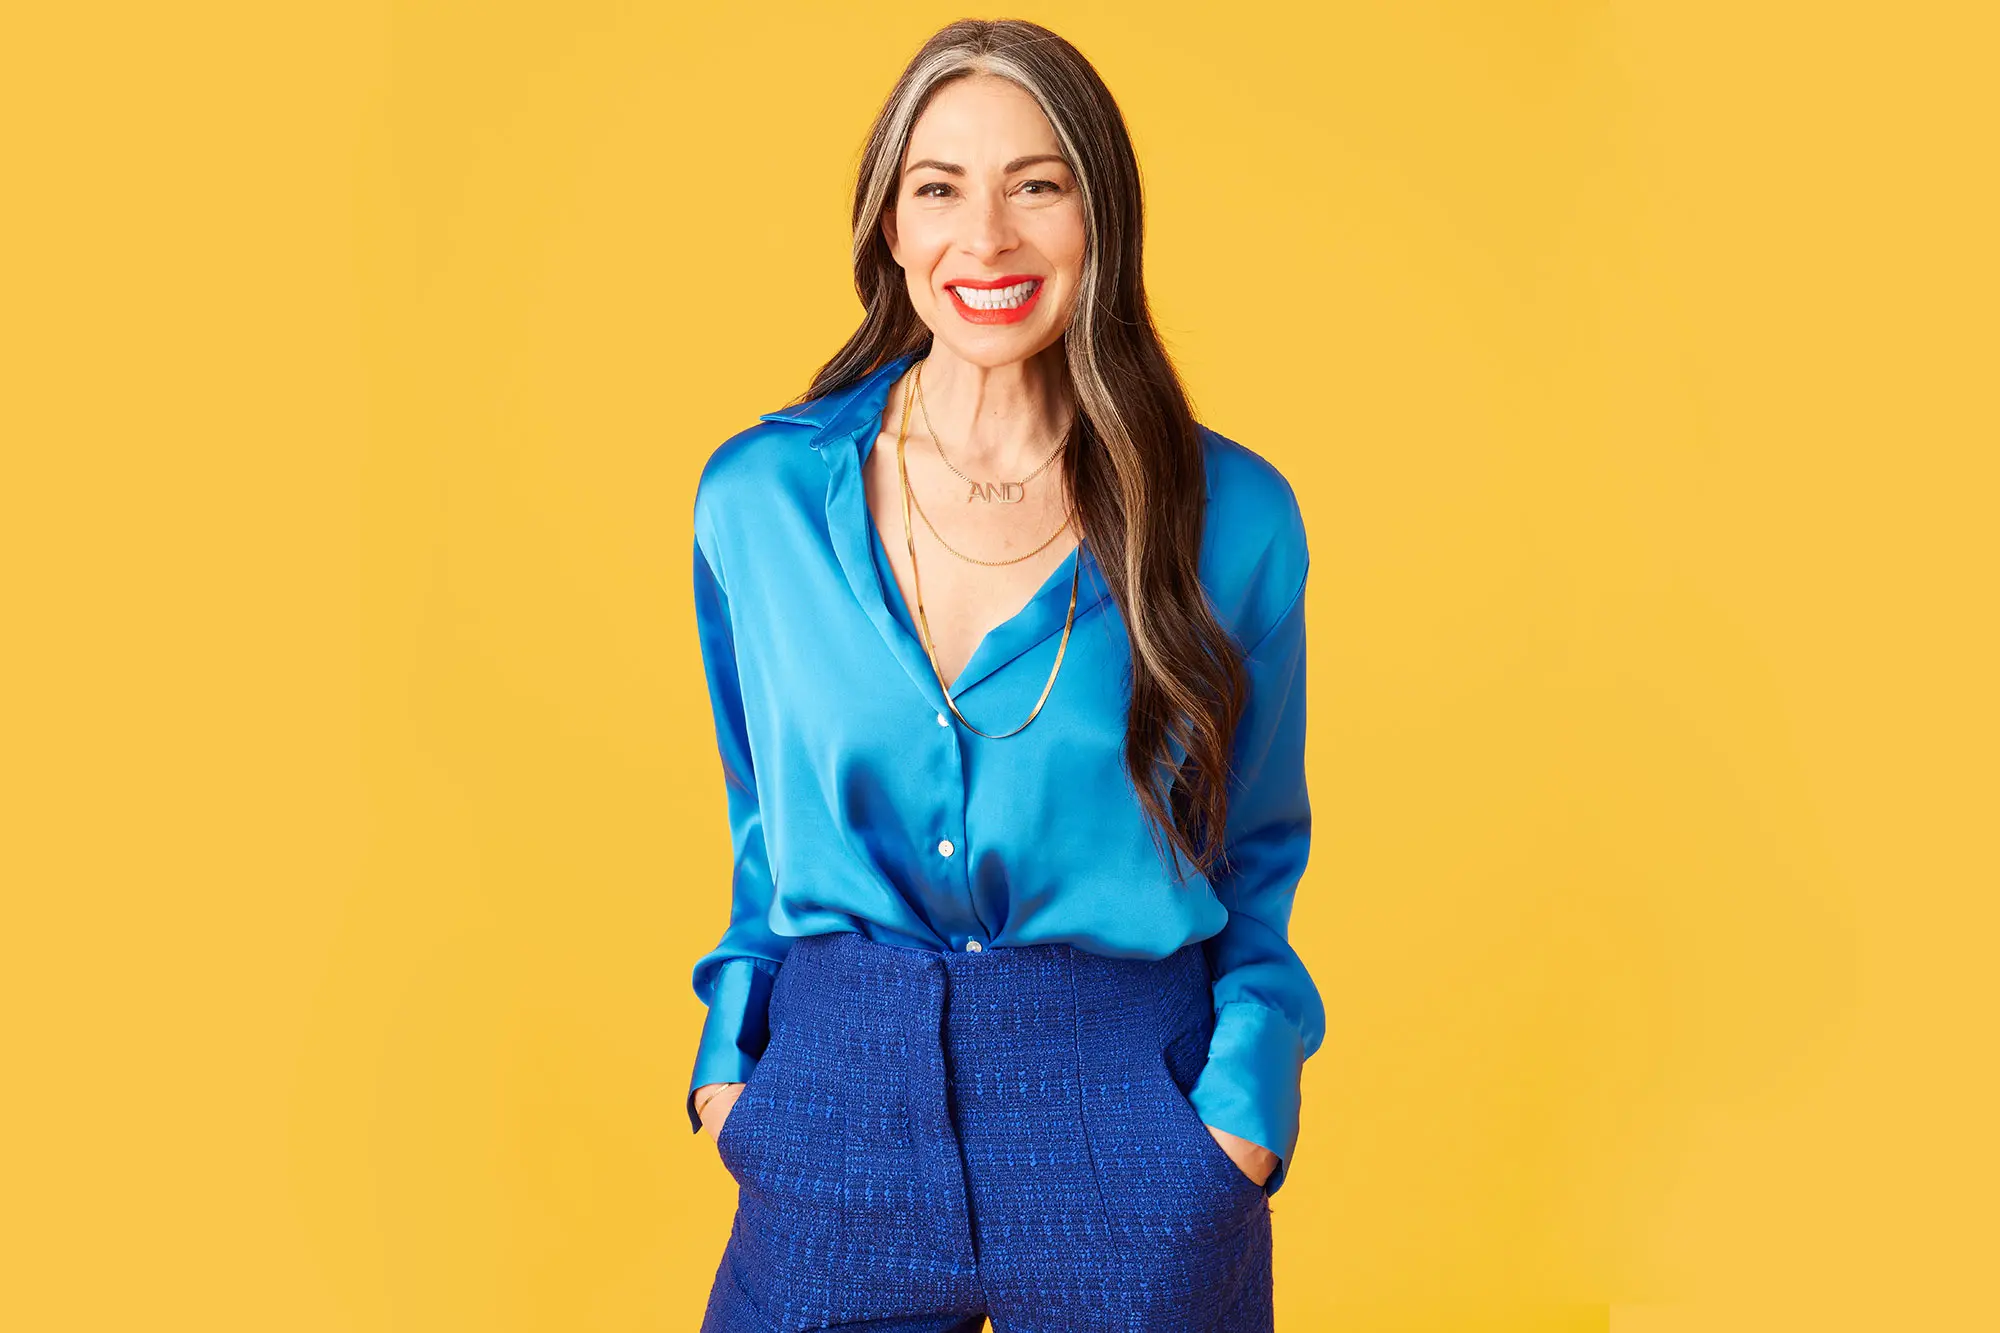 Stacy London dressed in vibrant blue, smiling on tangerine background. AW514